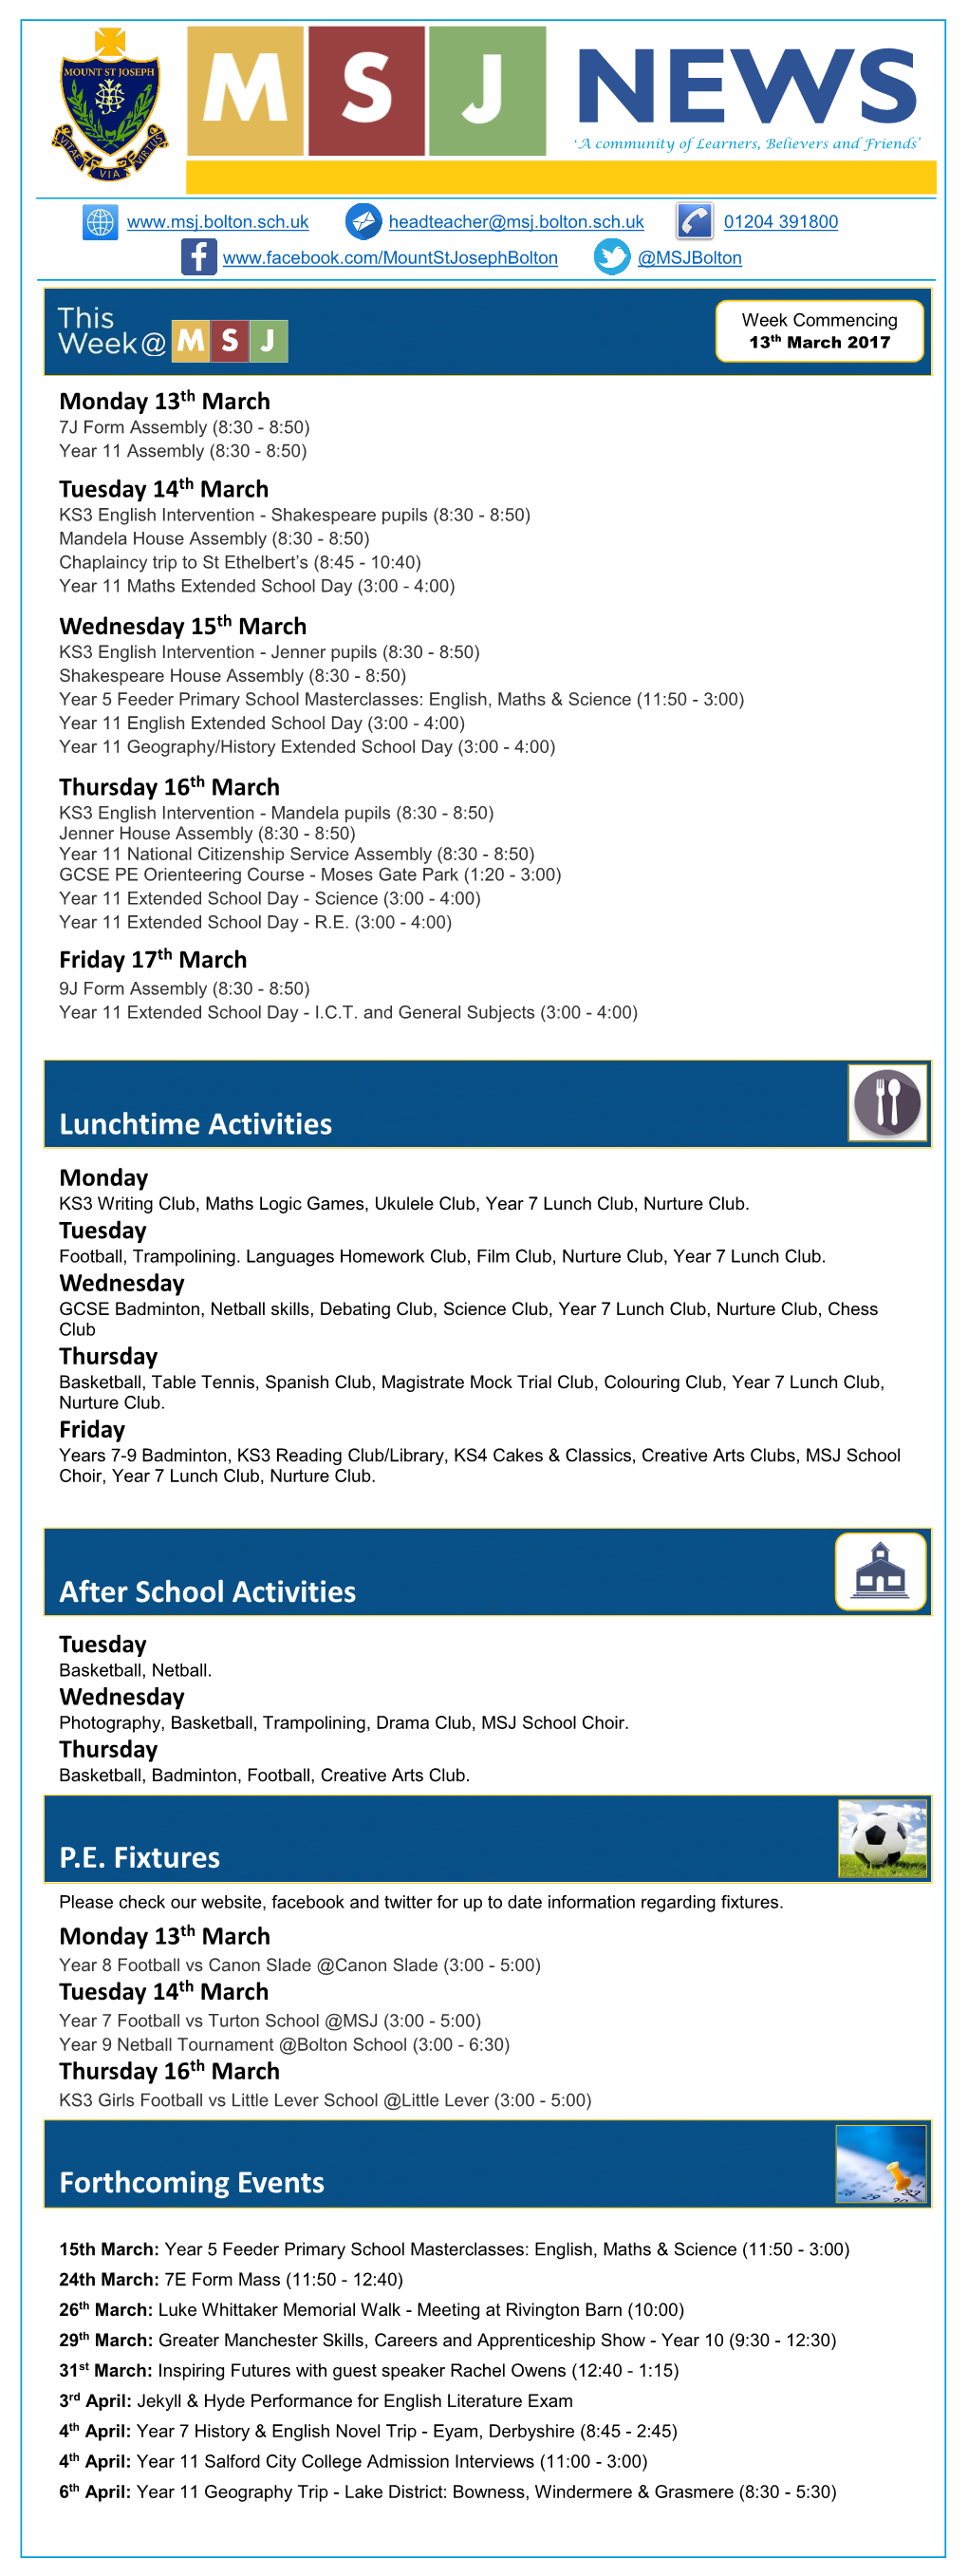 Lunchtime Activities After School Activities P.E. Fixtures Forthcoming